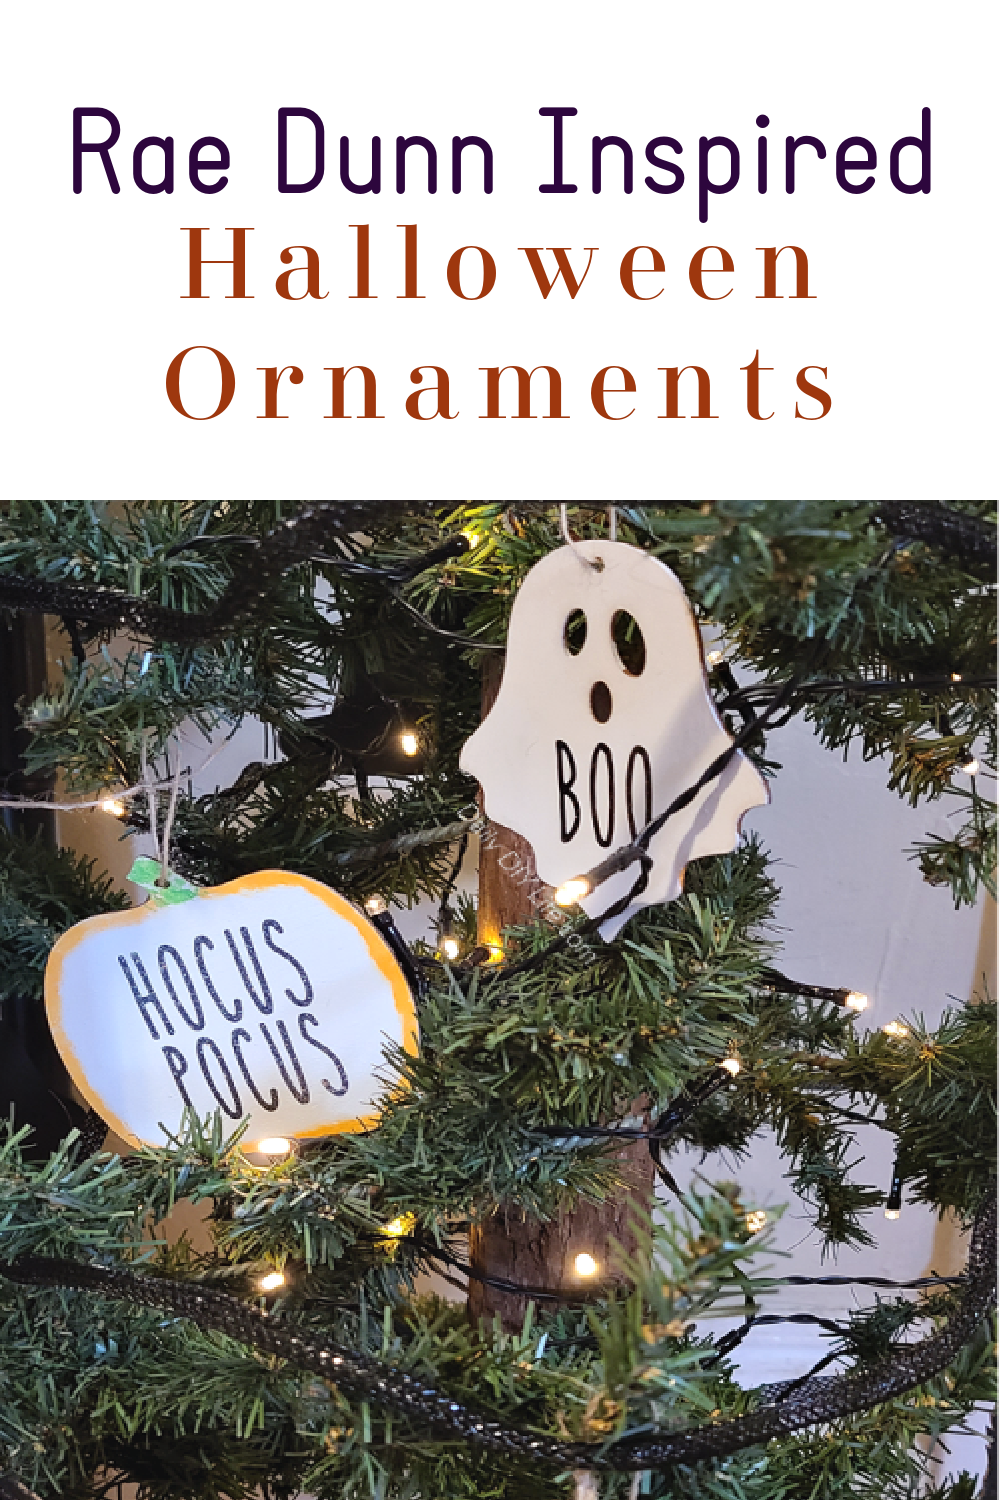 Adorable Rae Dunn inspired Halloween decorations are a fun way to add a little sparkle and class to your holiday decor. Using StyleTech Craft Ultra Metallic Glitter Vinyl adds some bling and pizzaz to everything. DIY Halloween ornaments get a fun makeover with some paint and a little bling. They are super easy to make, you will want to make them all. #Sponsored #StyleTechCraft #StyleTechVinyl #UltraMetalicVinyl #CricutMade #Cricut #HalloweenDIY #CricutHalloween #RaeDunnHalloween #HalloweenTreeDecor #DIYHalloweenOrnaments